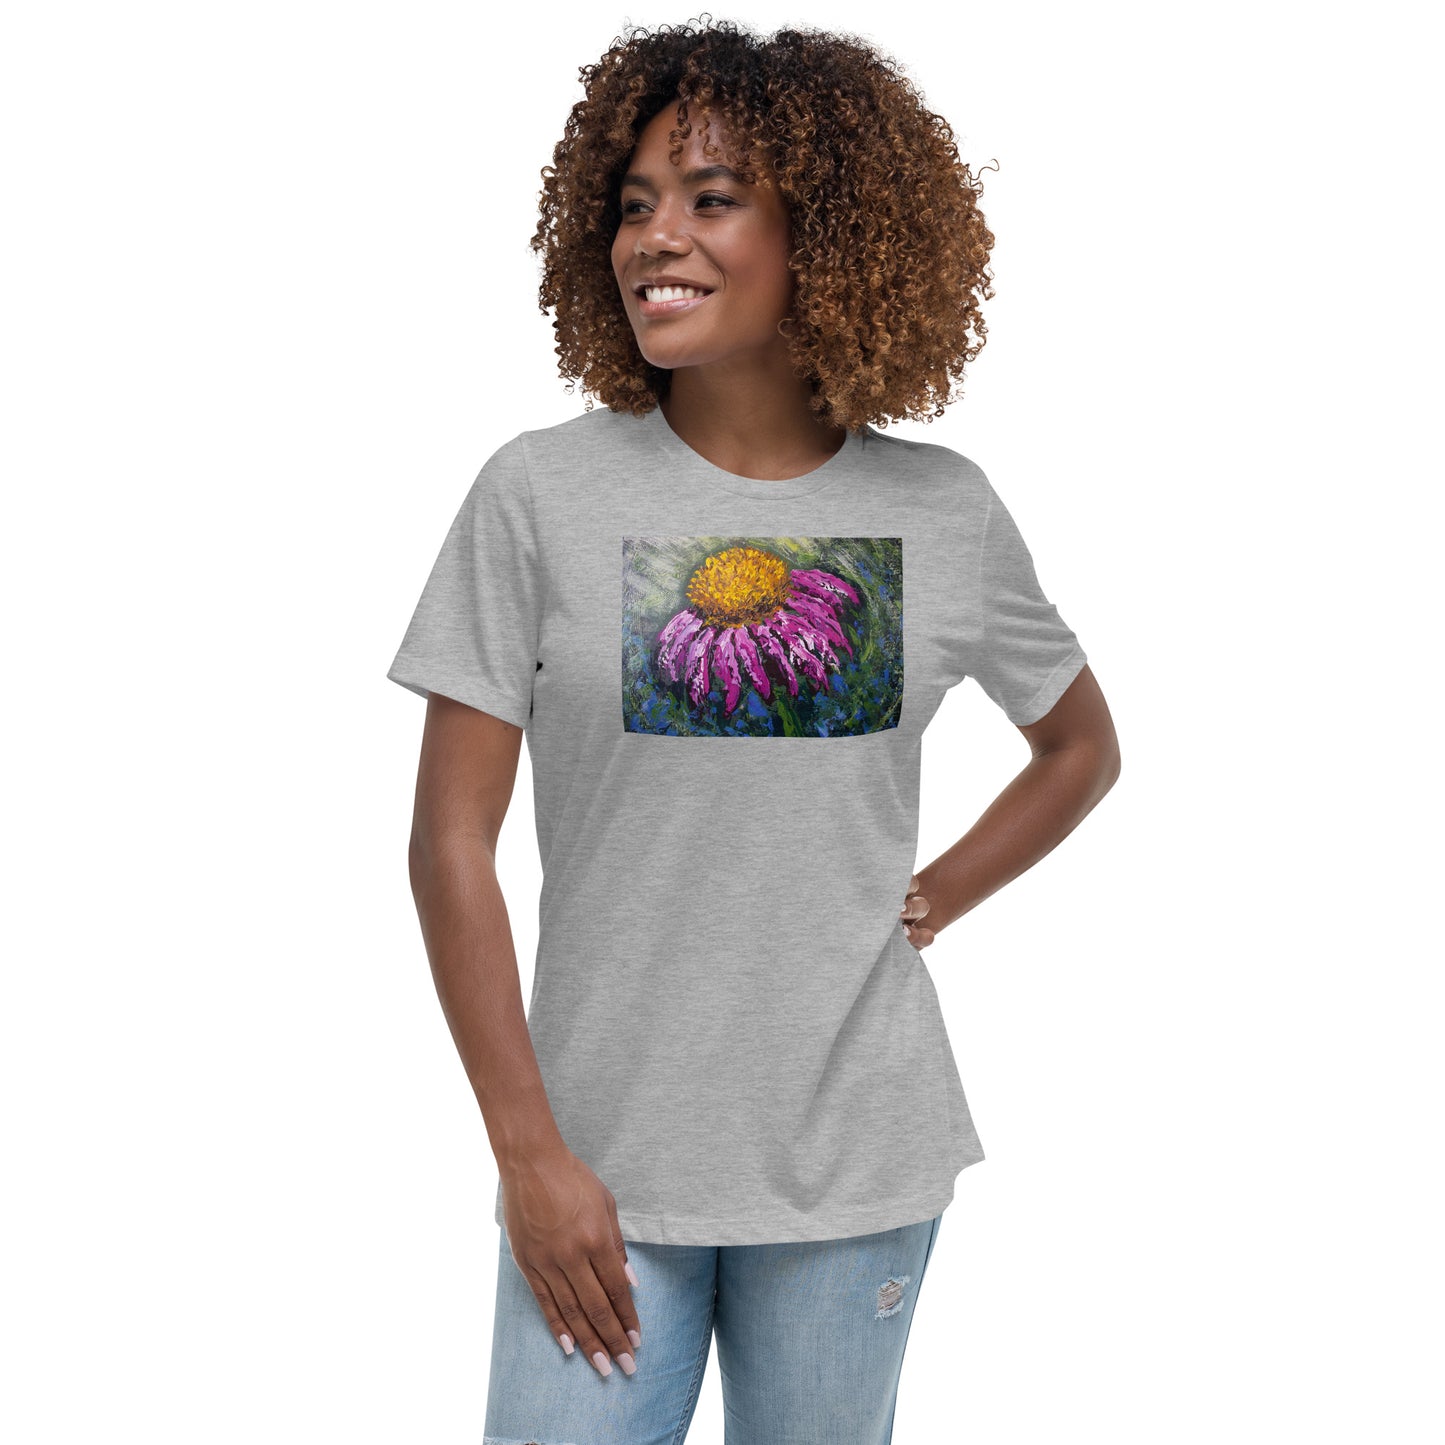 Women's Relaxed T-Shirt "Courage for the Journey"